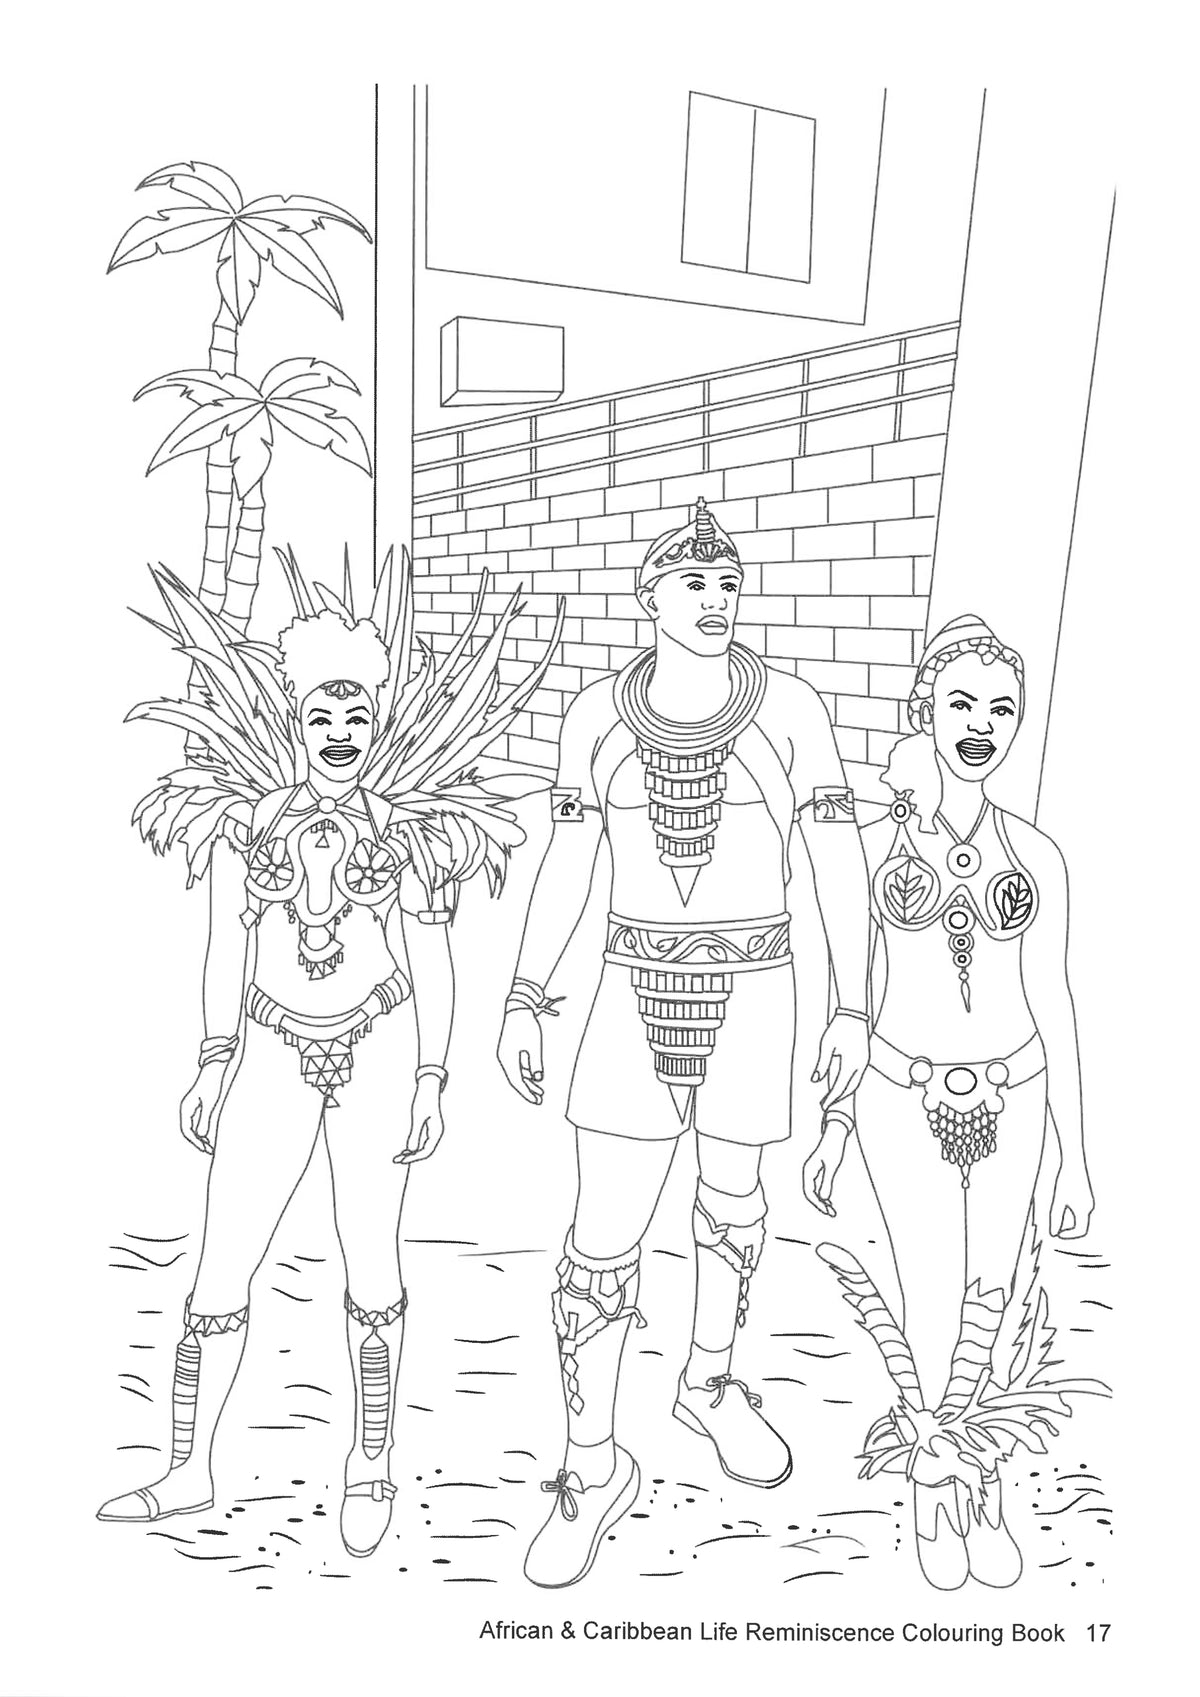 Illustration of carnival dancers from the Caribbean which can be coloured in.